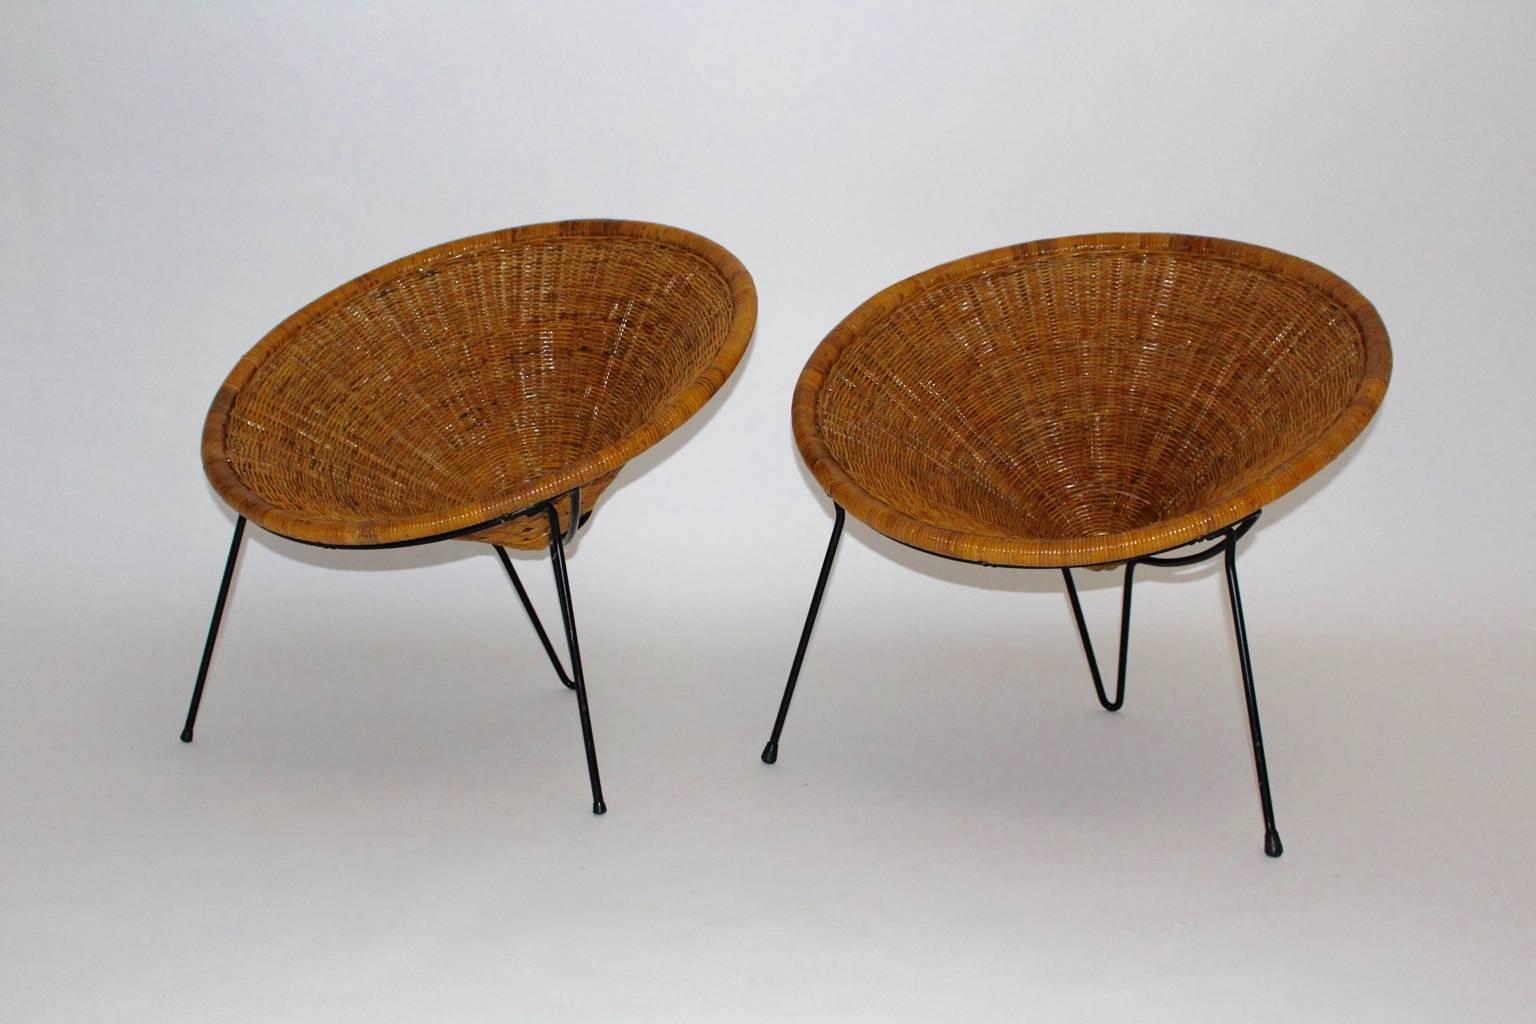 Mid Century Modern pair of rattan or wicker vintage garden chairs or club chairs, which was designed by Roberto Mango, Italy, 1950s.
Roberto Mango ( 1920 - 2003 ) Italian architect
Roberto Mango began his career in 1946 with his graduation in